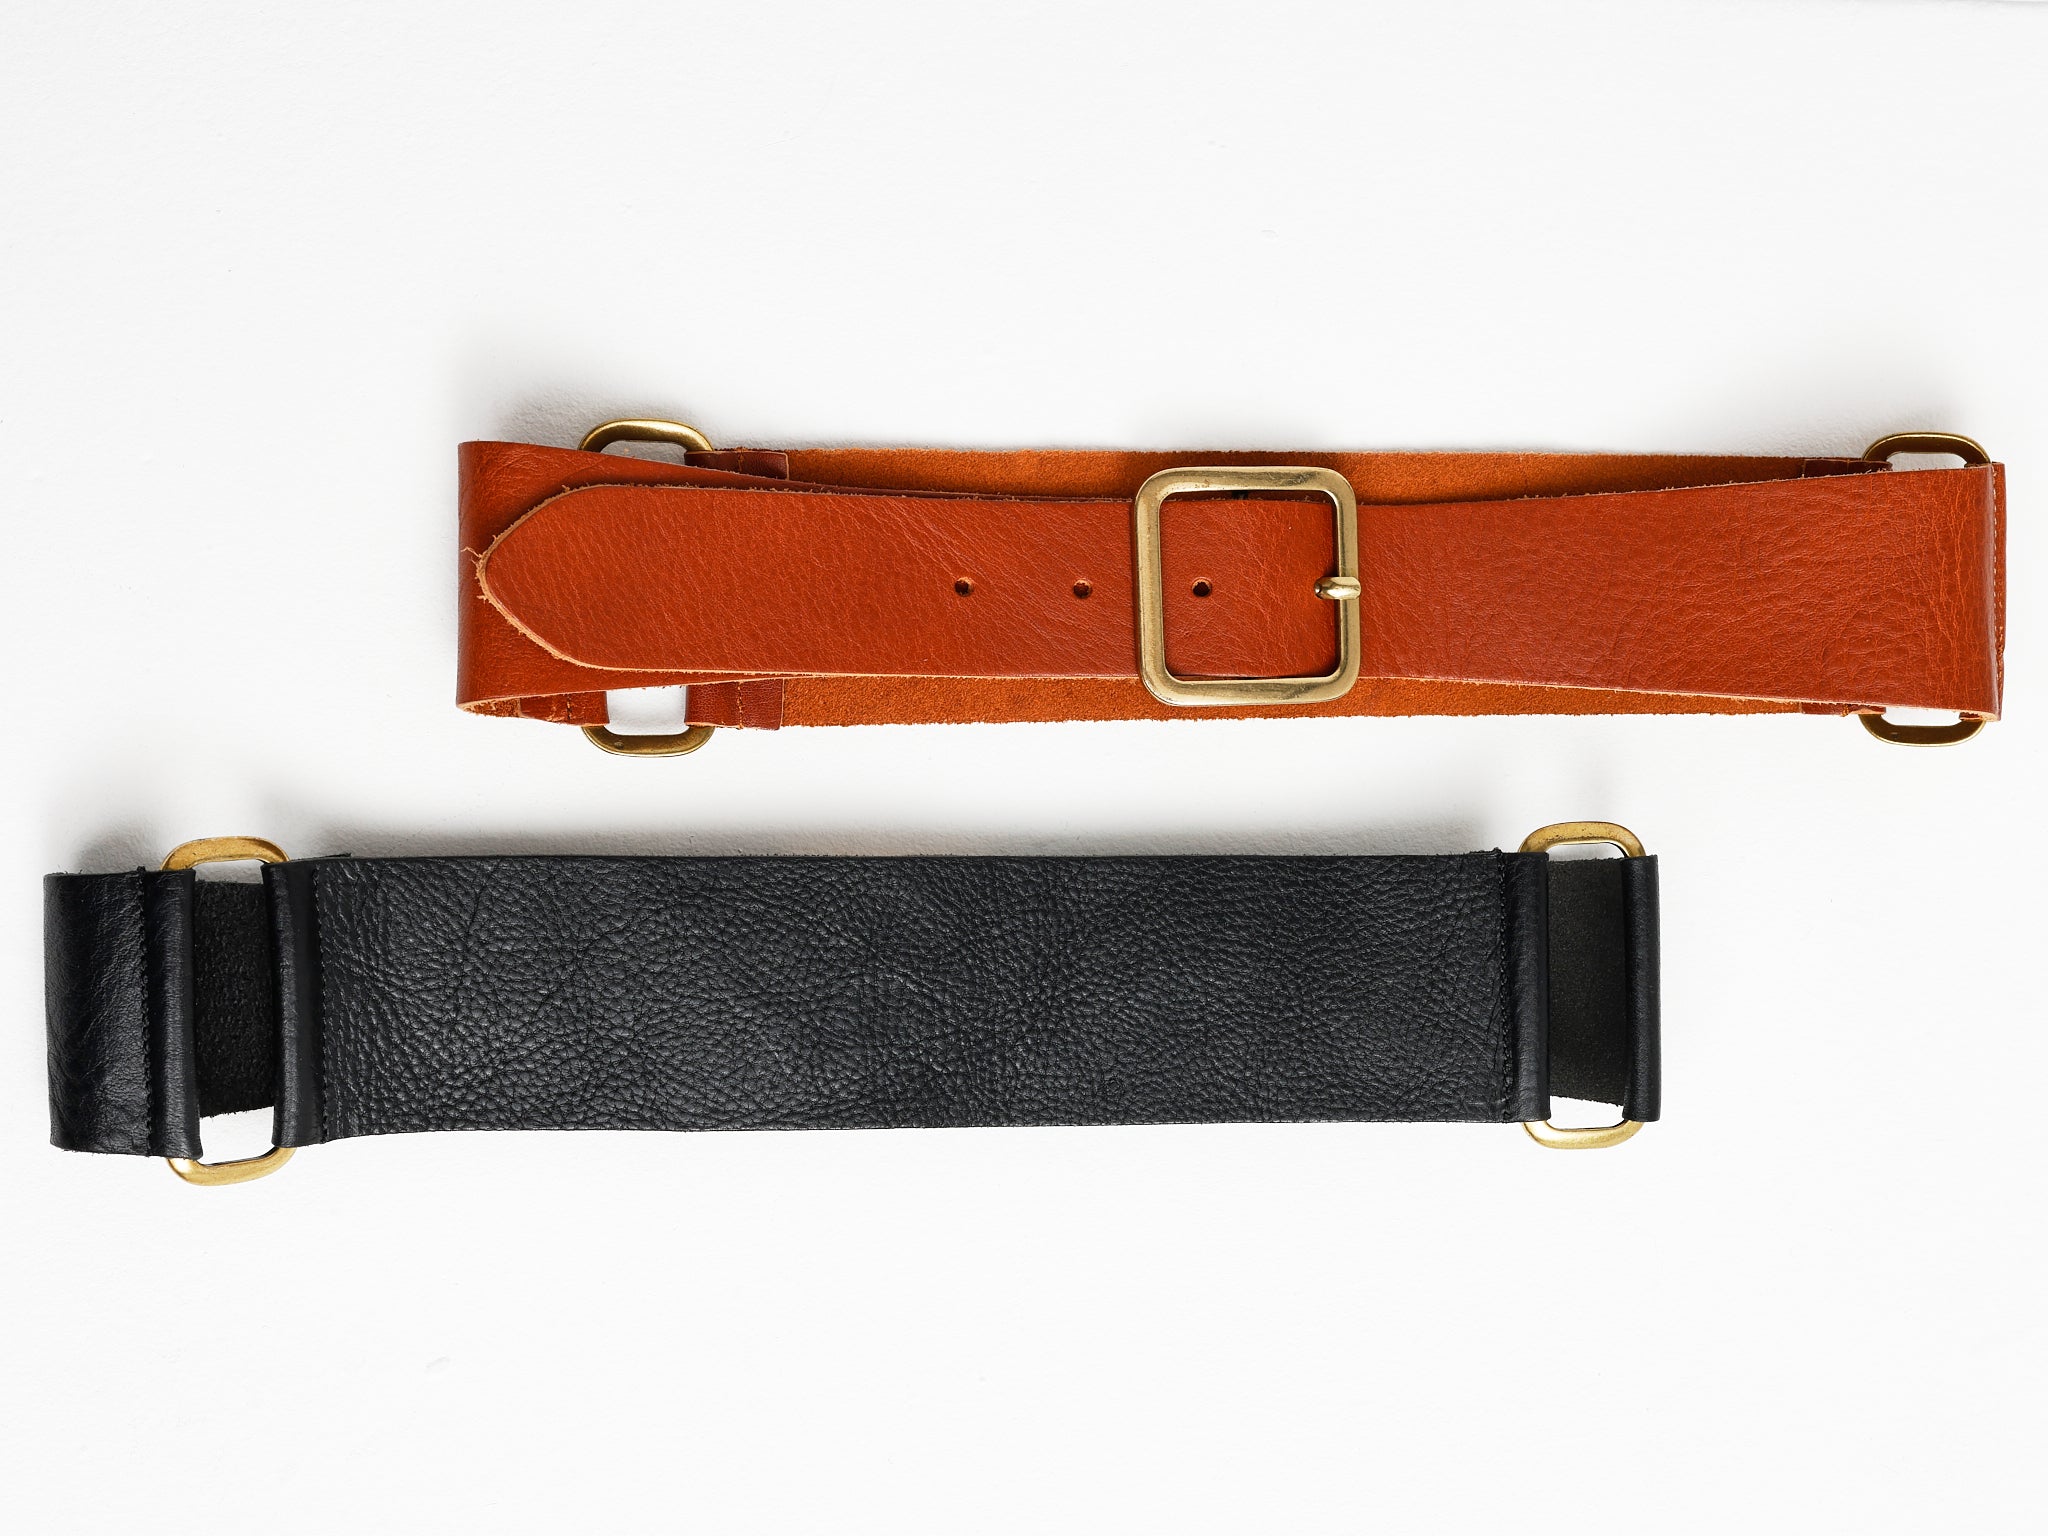 BELT WITH SQUARE BUCKLE BLACK